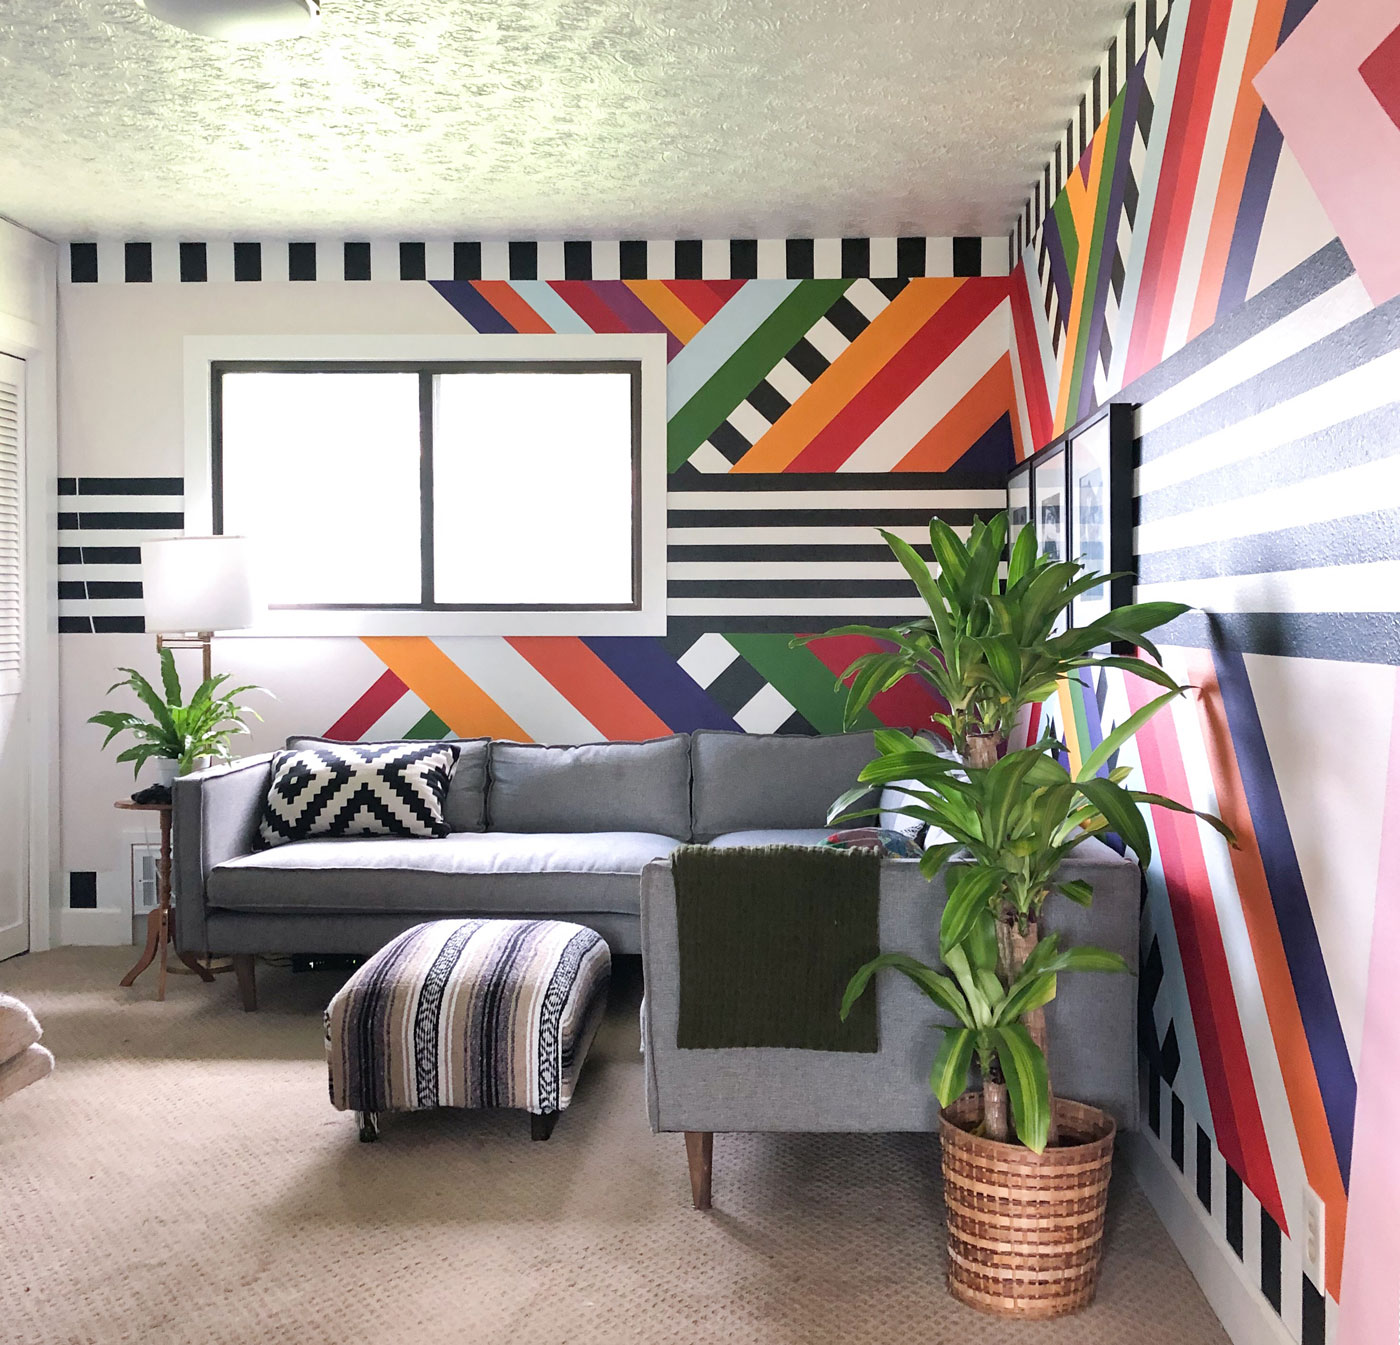 Bold-Striped-Painted-Mural-Grey-Joybird-Couch